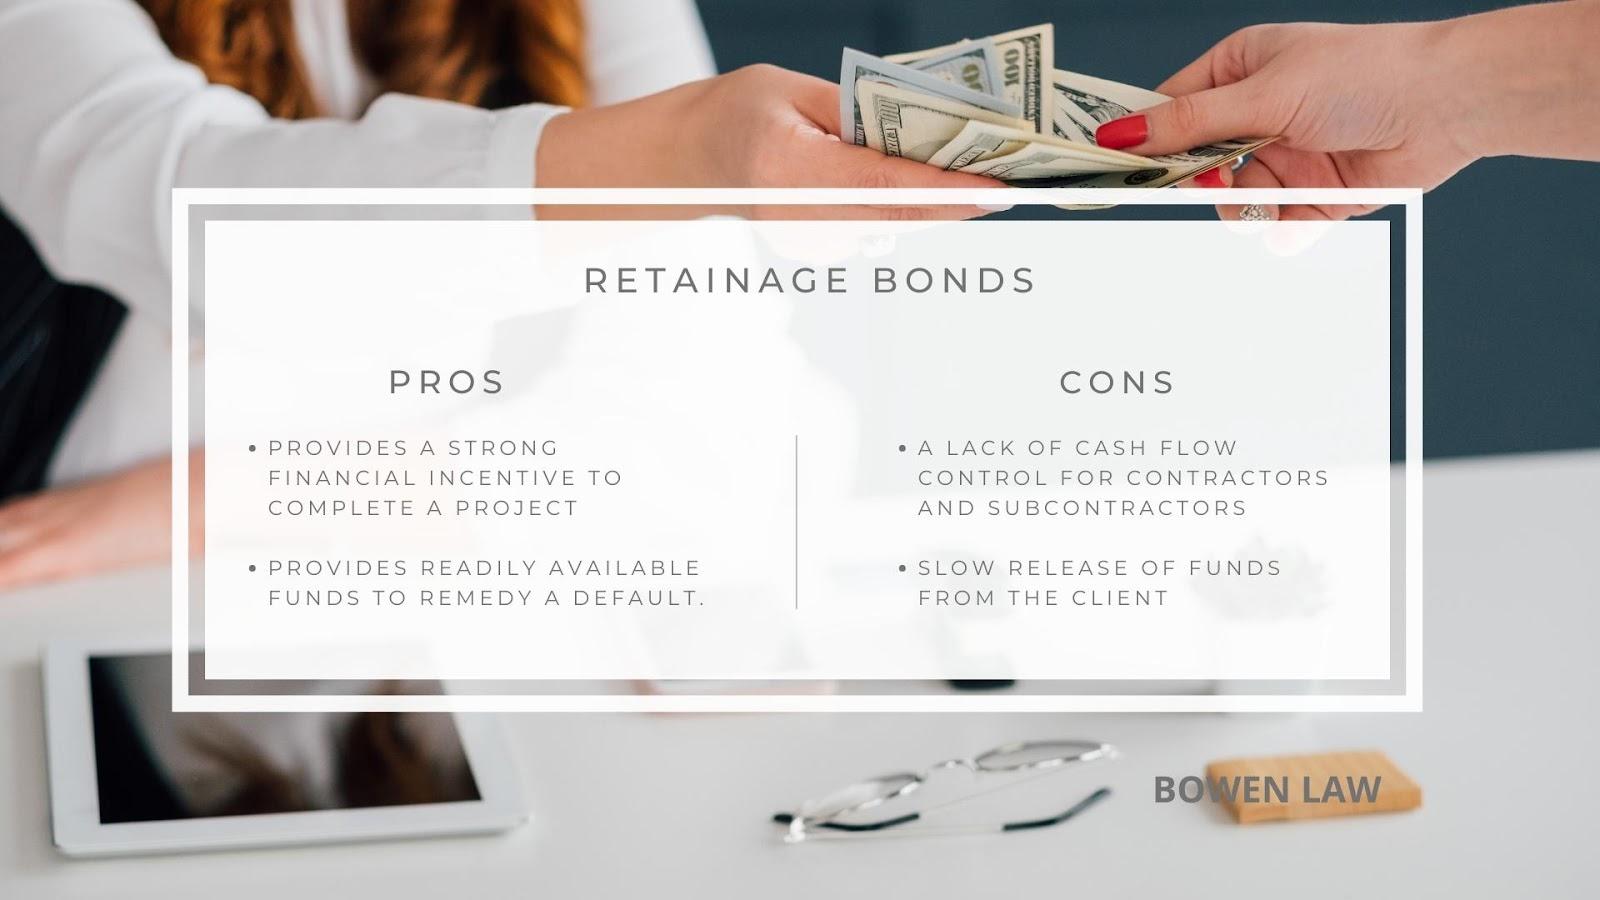 Infographic of the pros and cons of retainage bonds